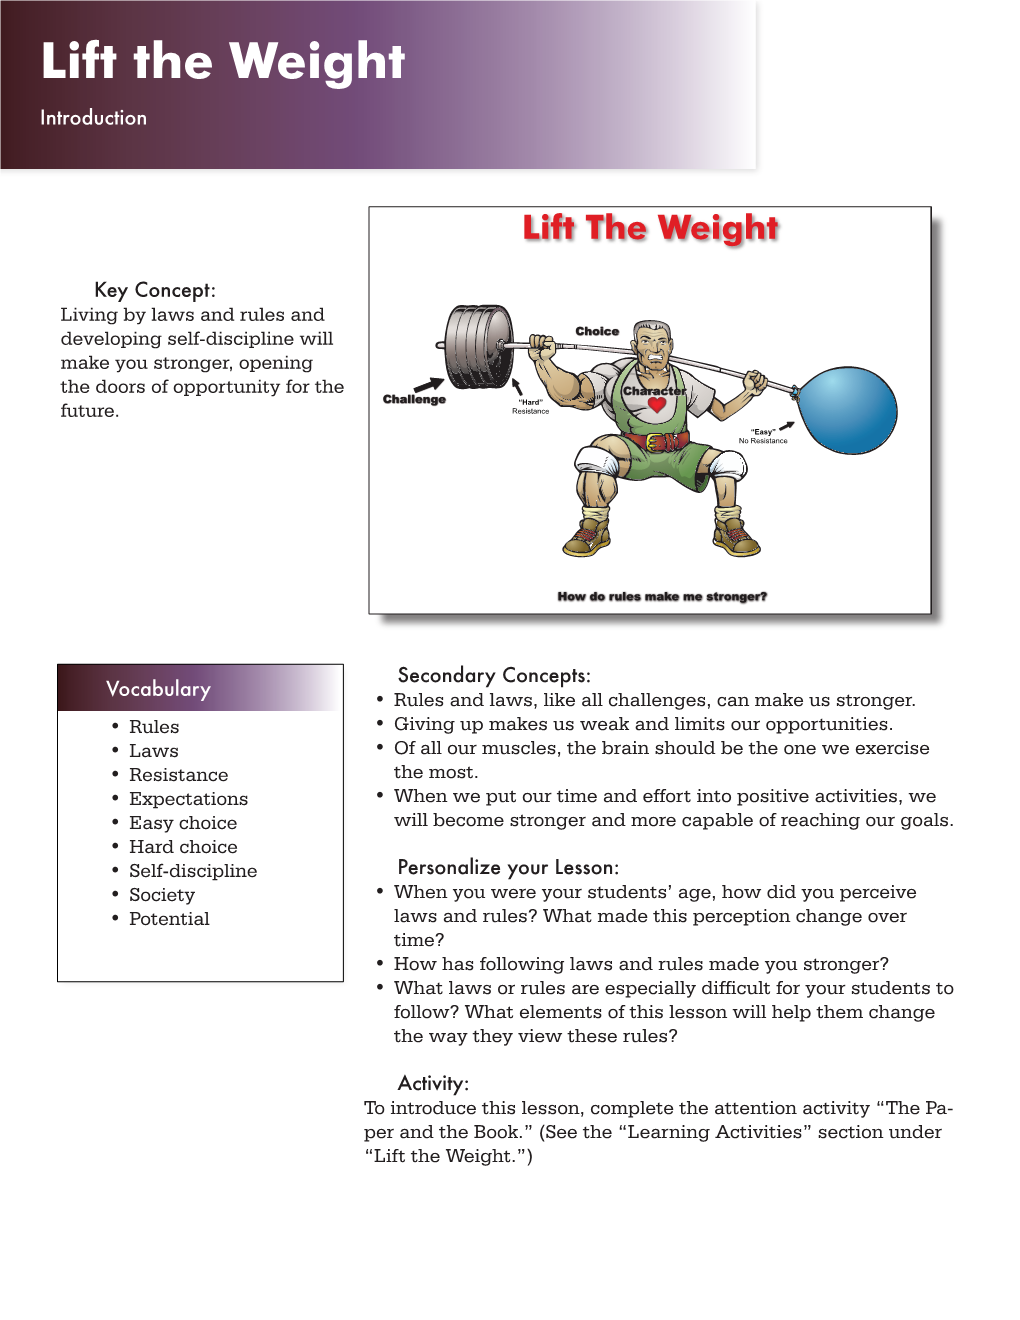 Lift the Weight: Elementary